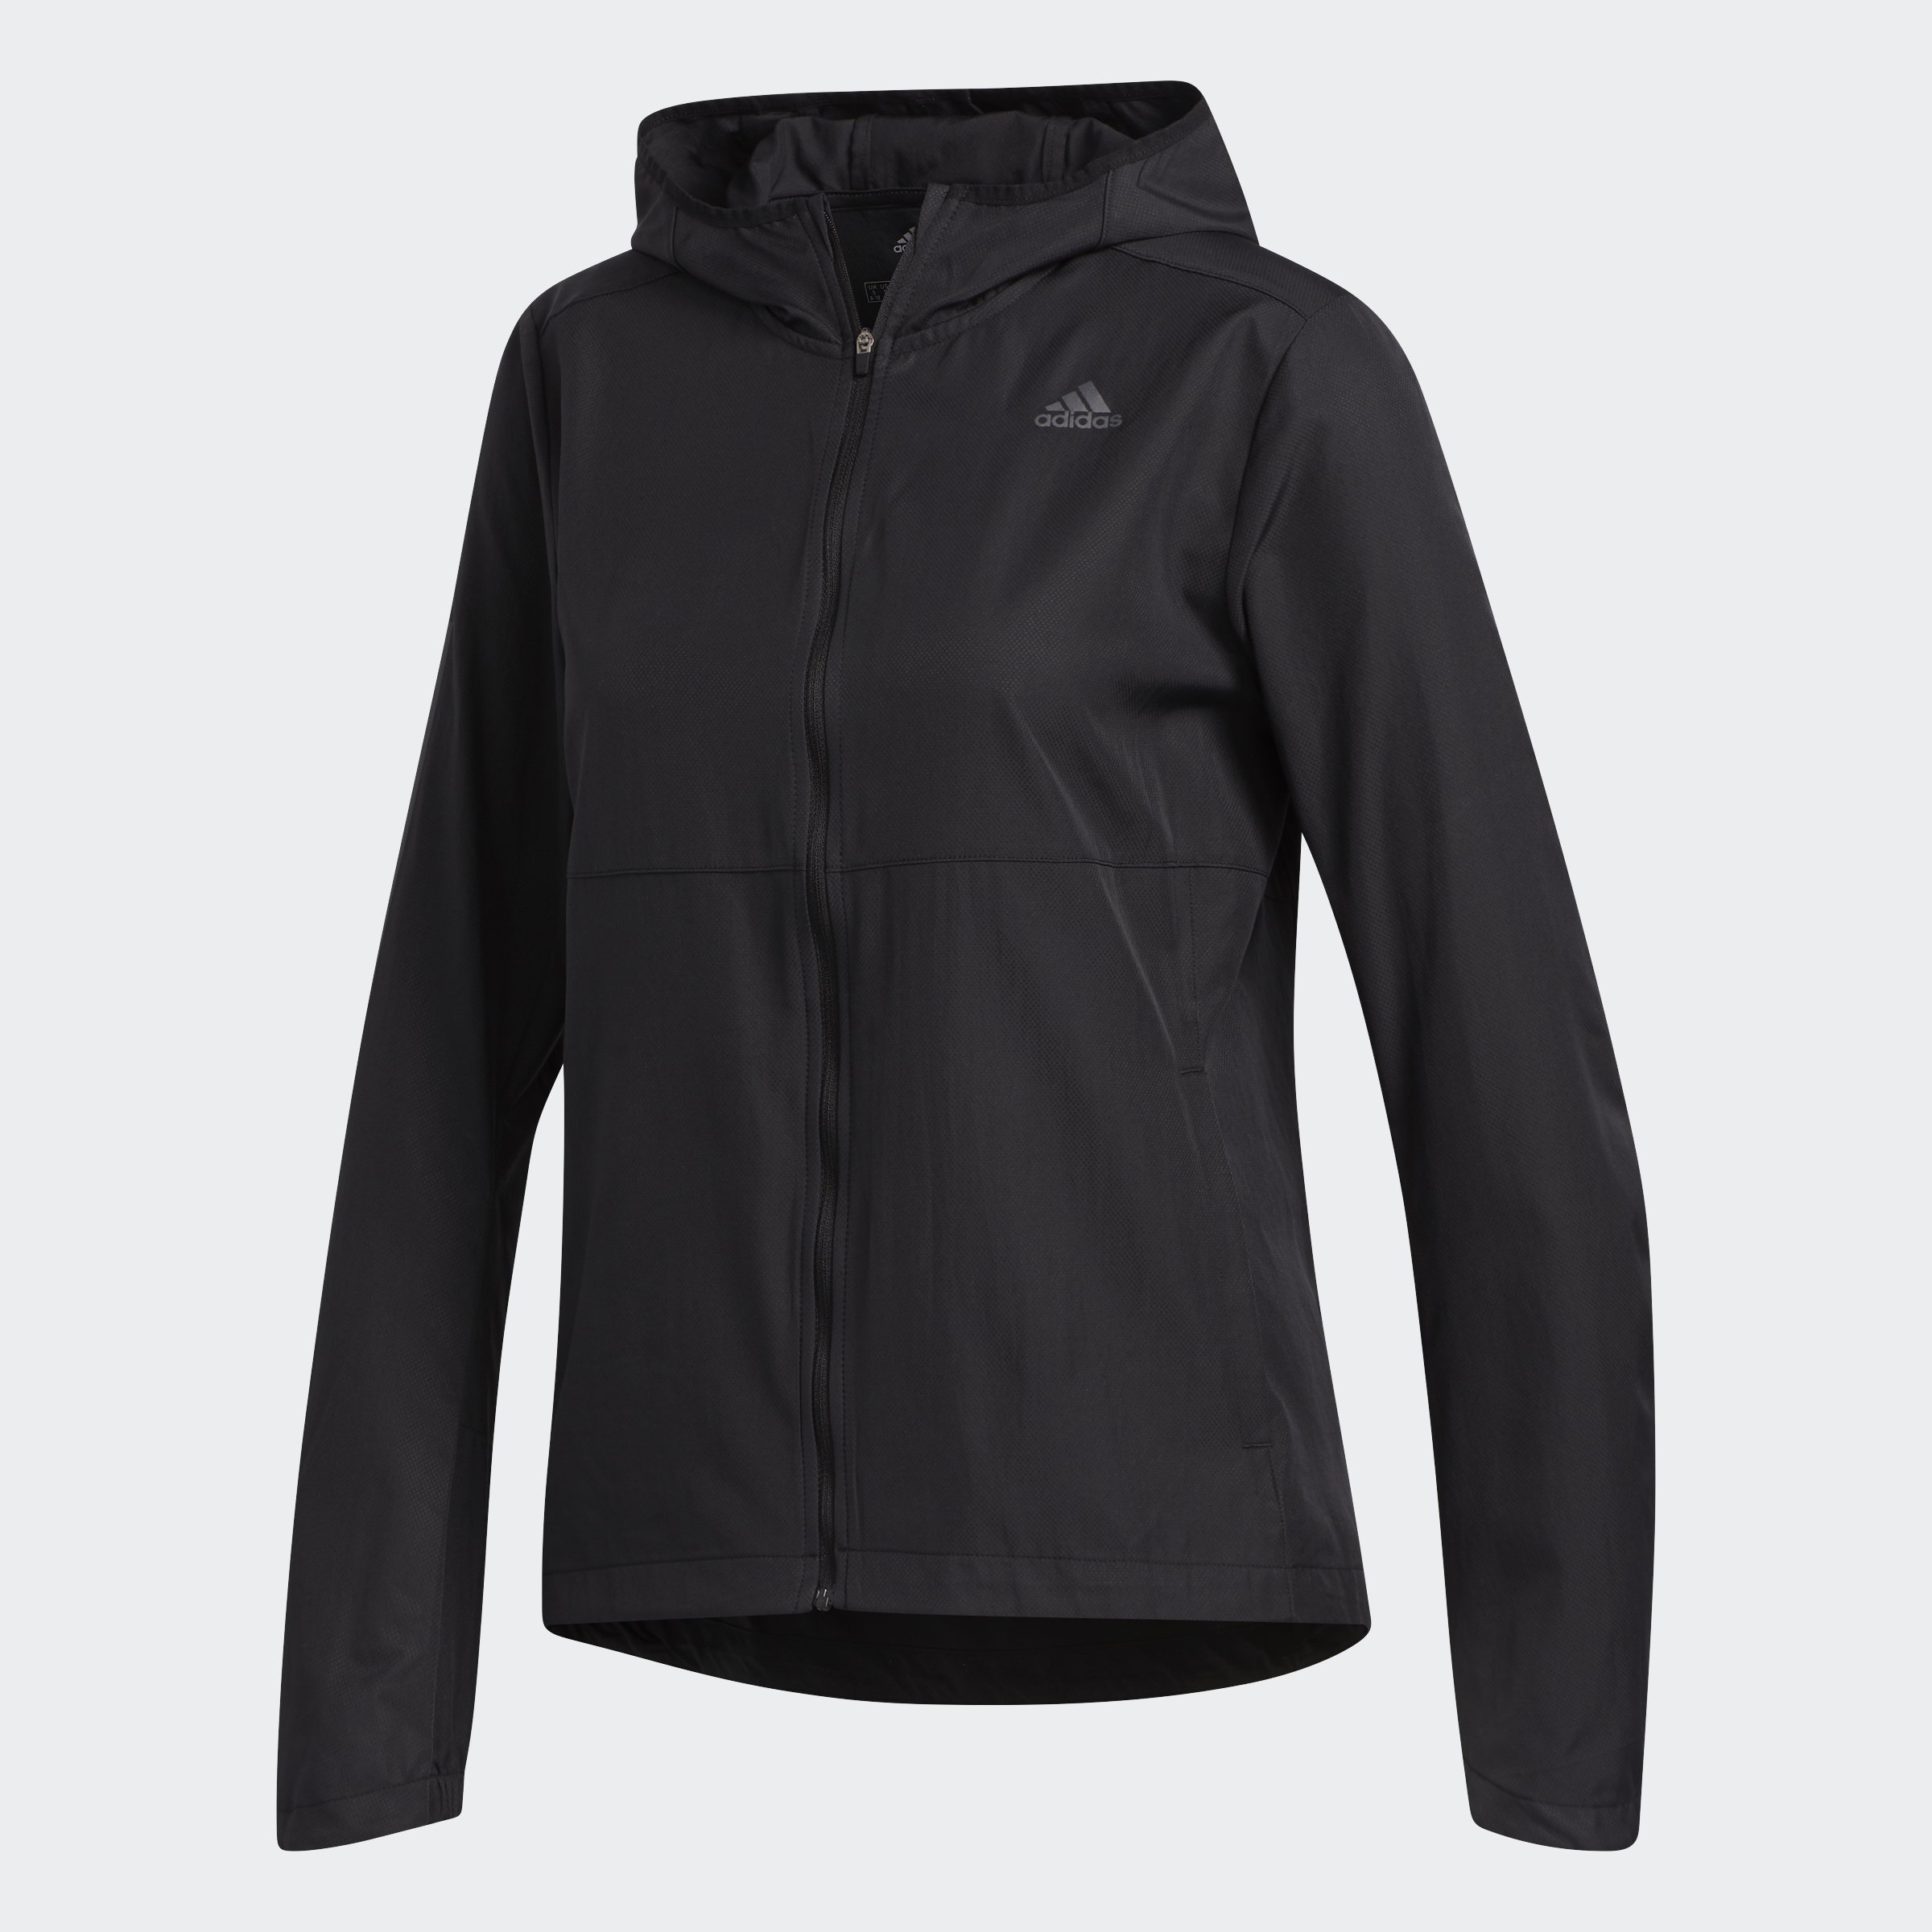 adidas Own the Run Hooded Wind Jacket for Women - Black, XL